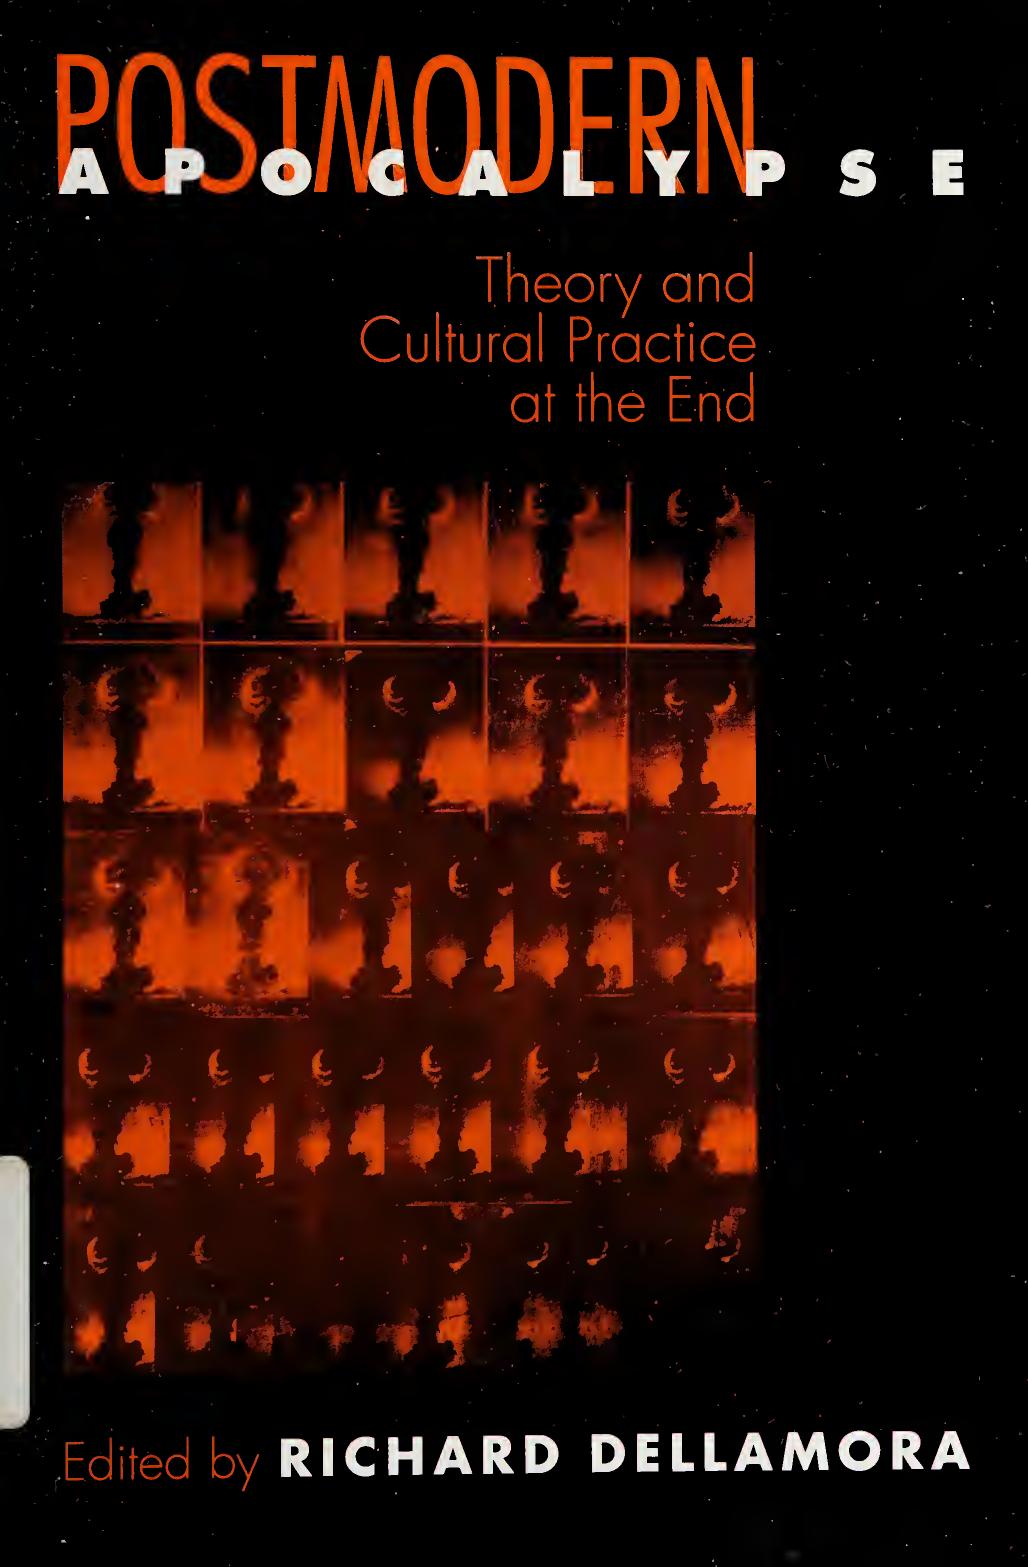 Postmodern Apocalypse: Theory and Cultural Practice at the End by Richard Dellamora